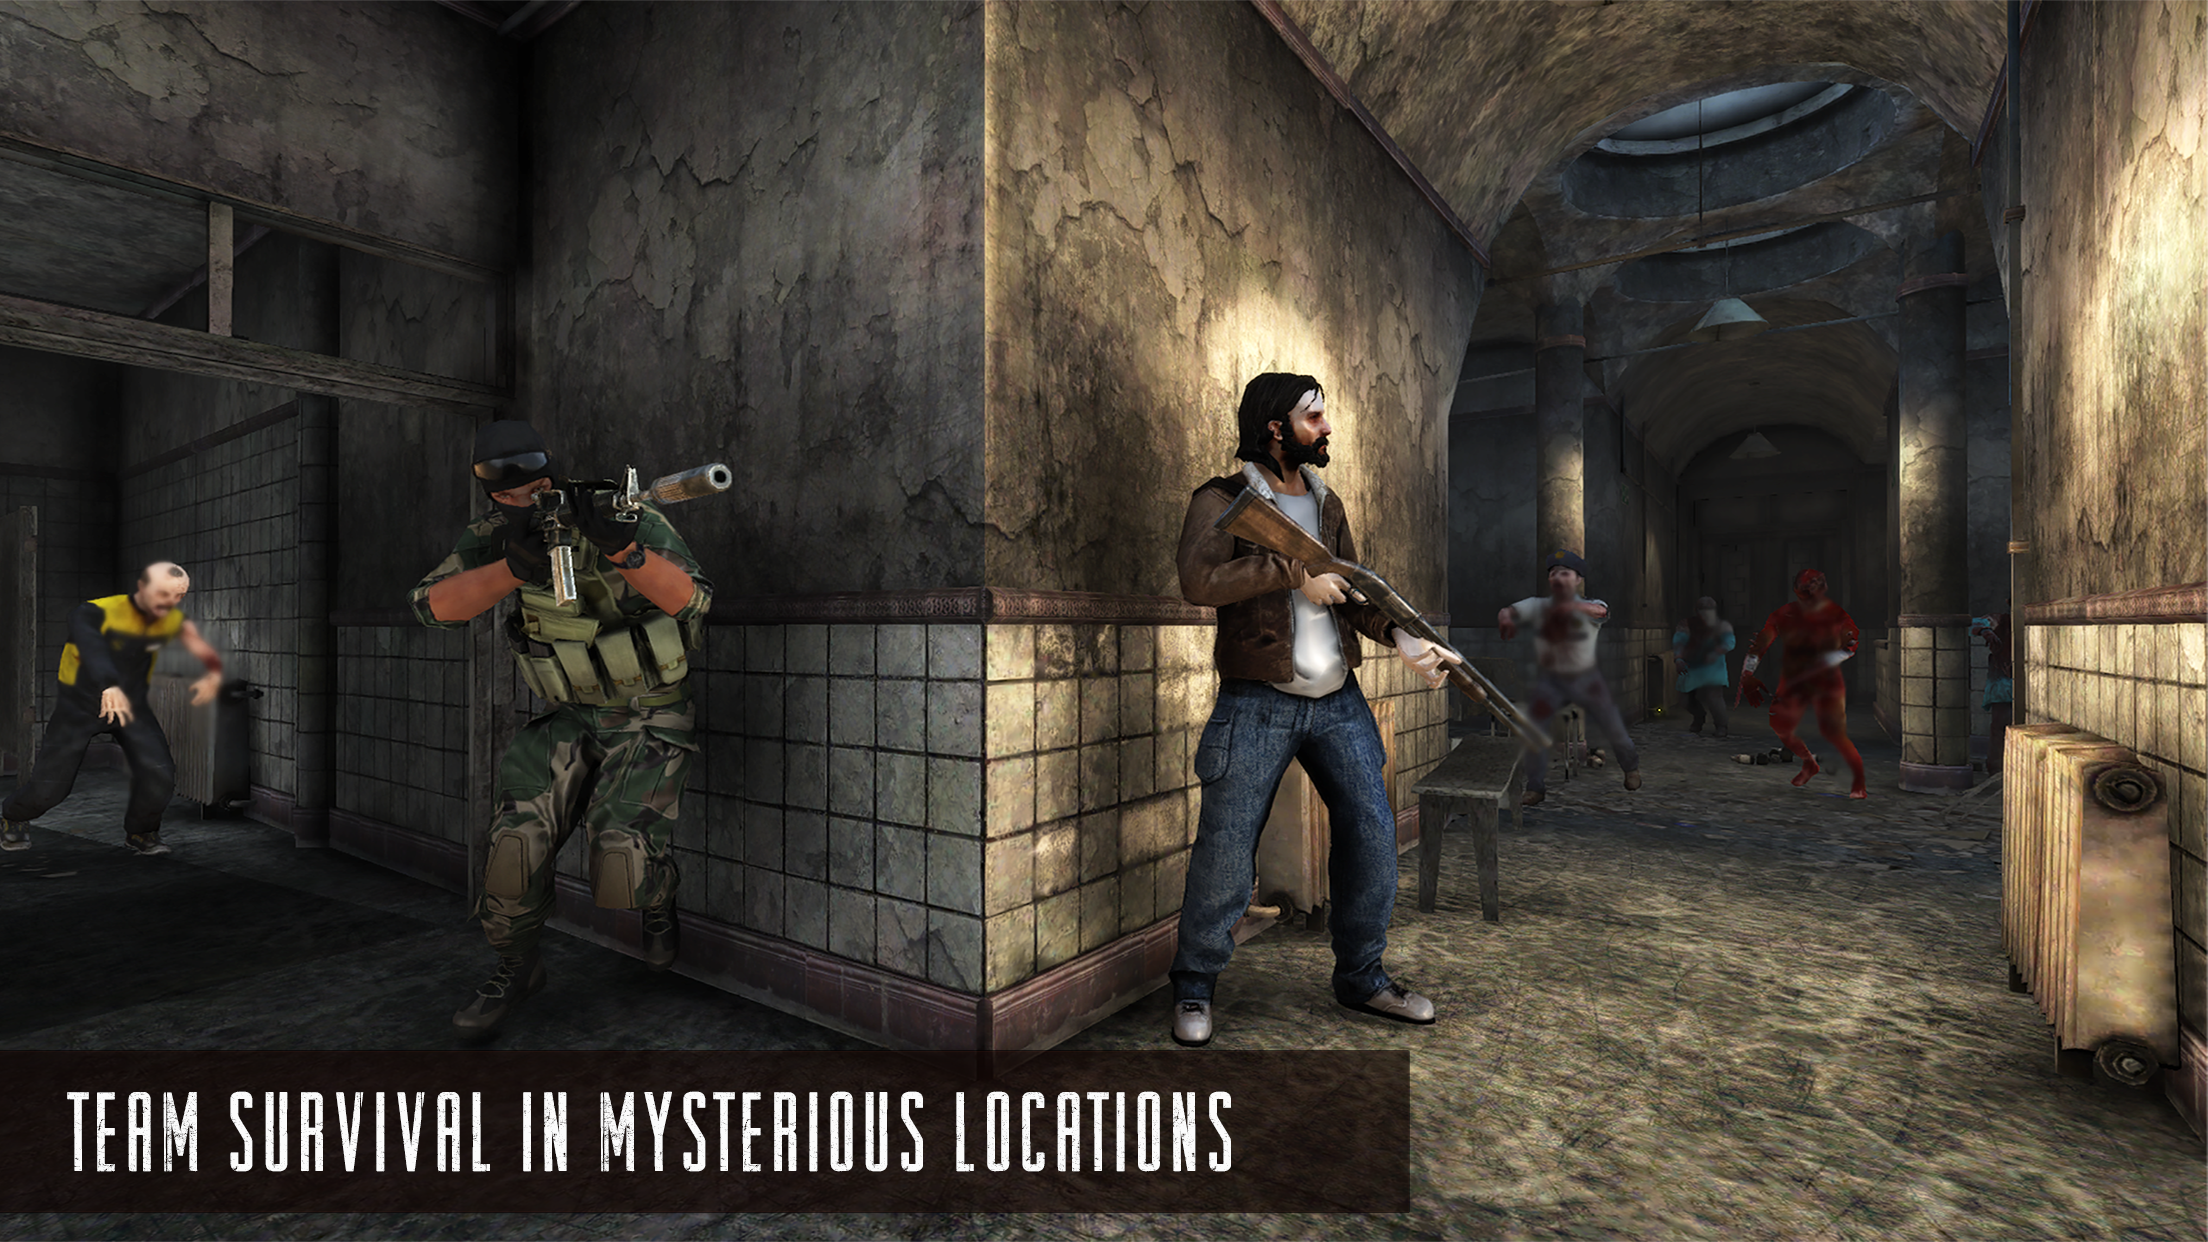  The online multiplayer zombie shooter game